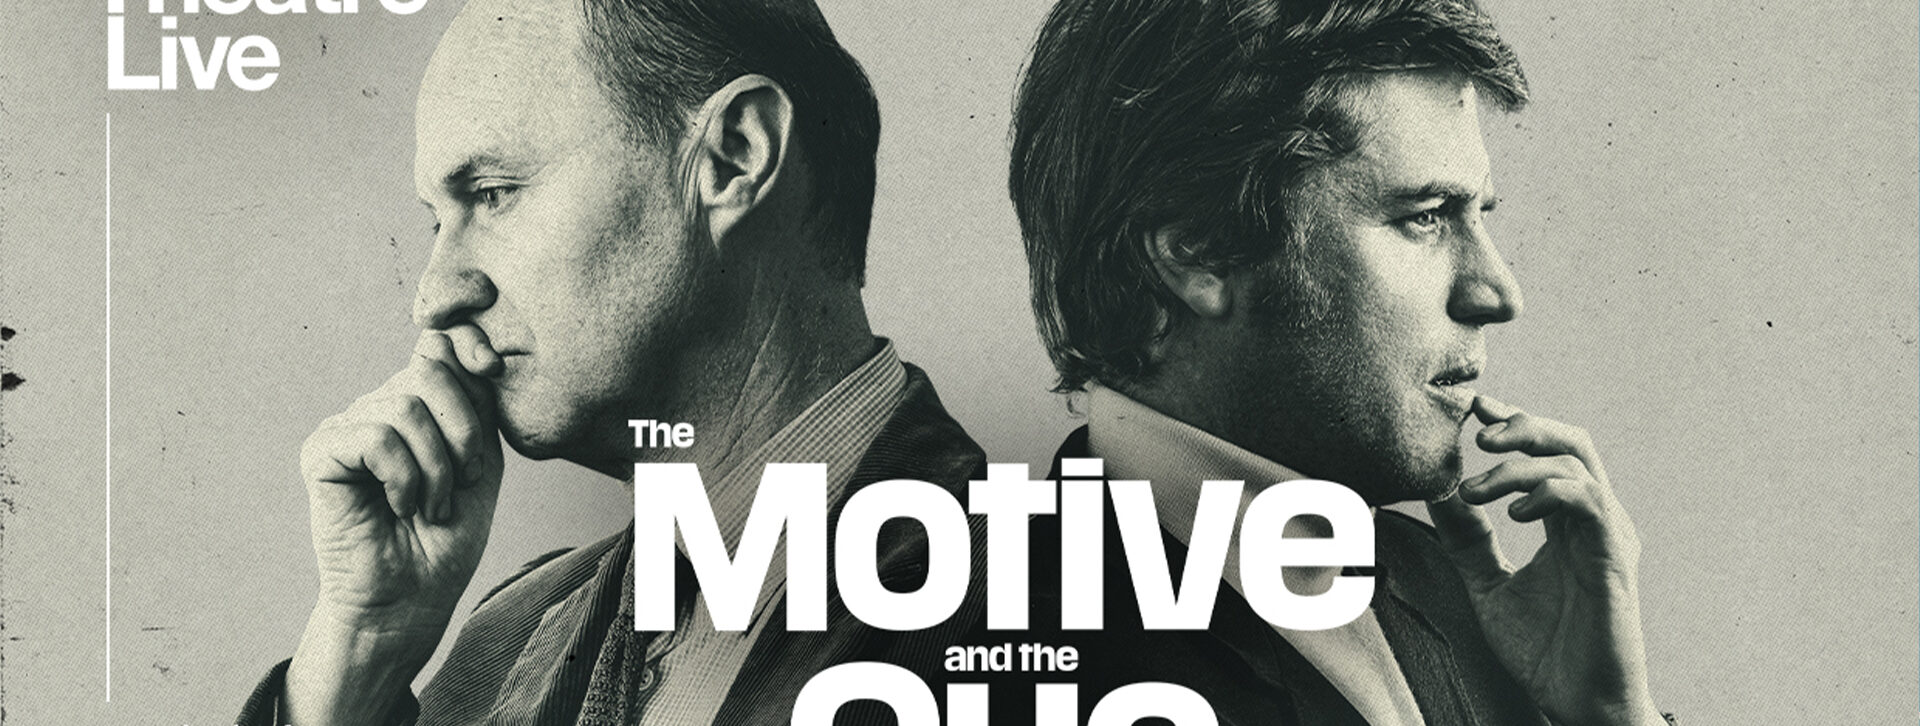 NT Live Screening: The Motive and the Cue